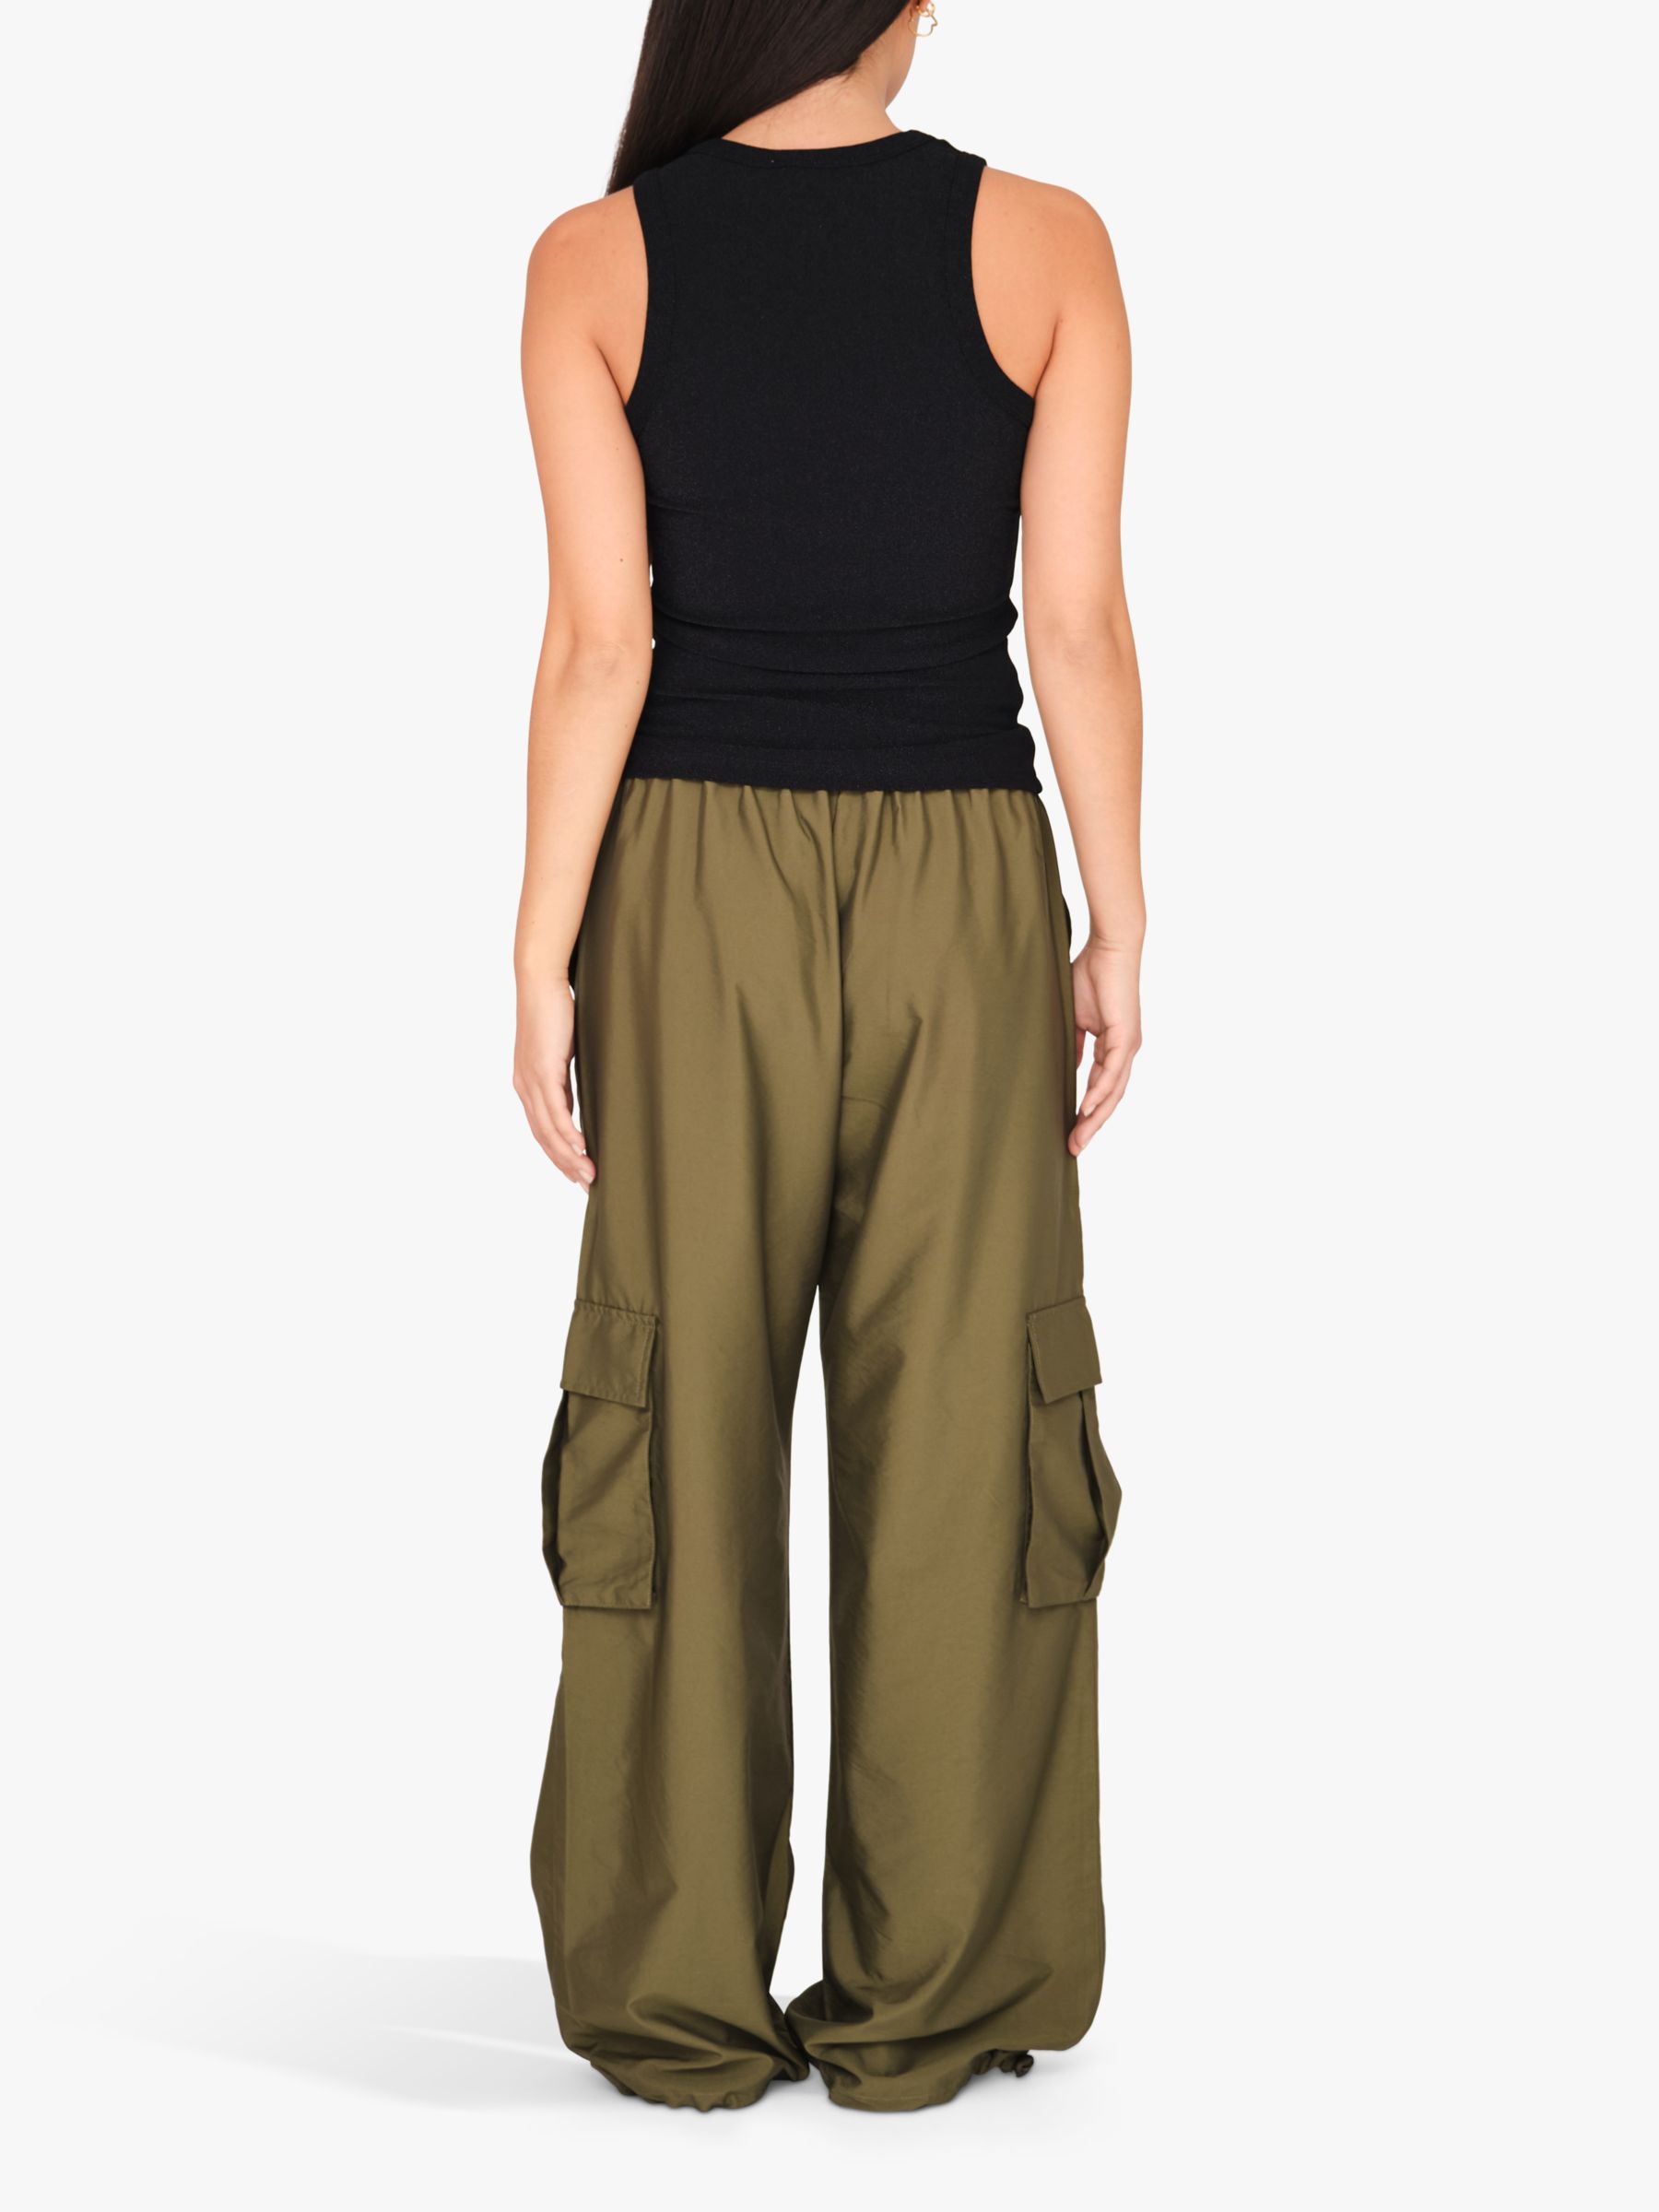 Buy A-VIEW Cargo Loose Fit Trousers, Army Online at johnlewis.com